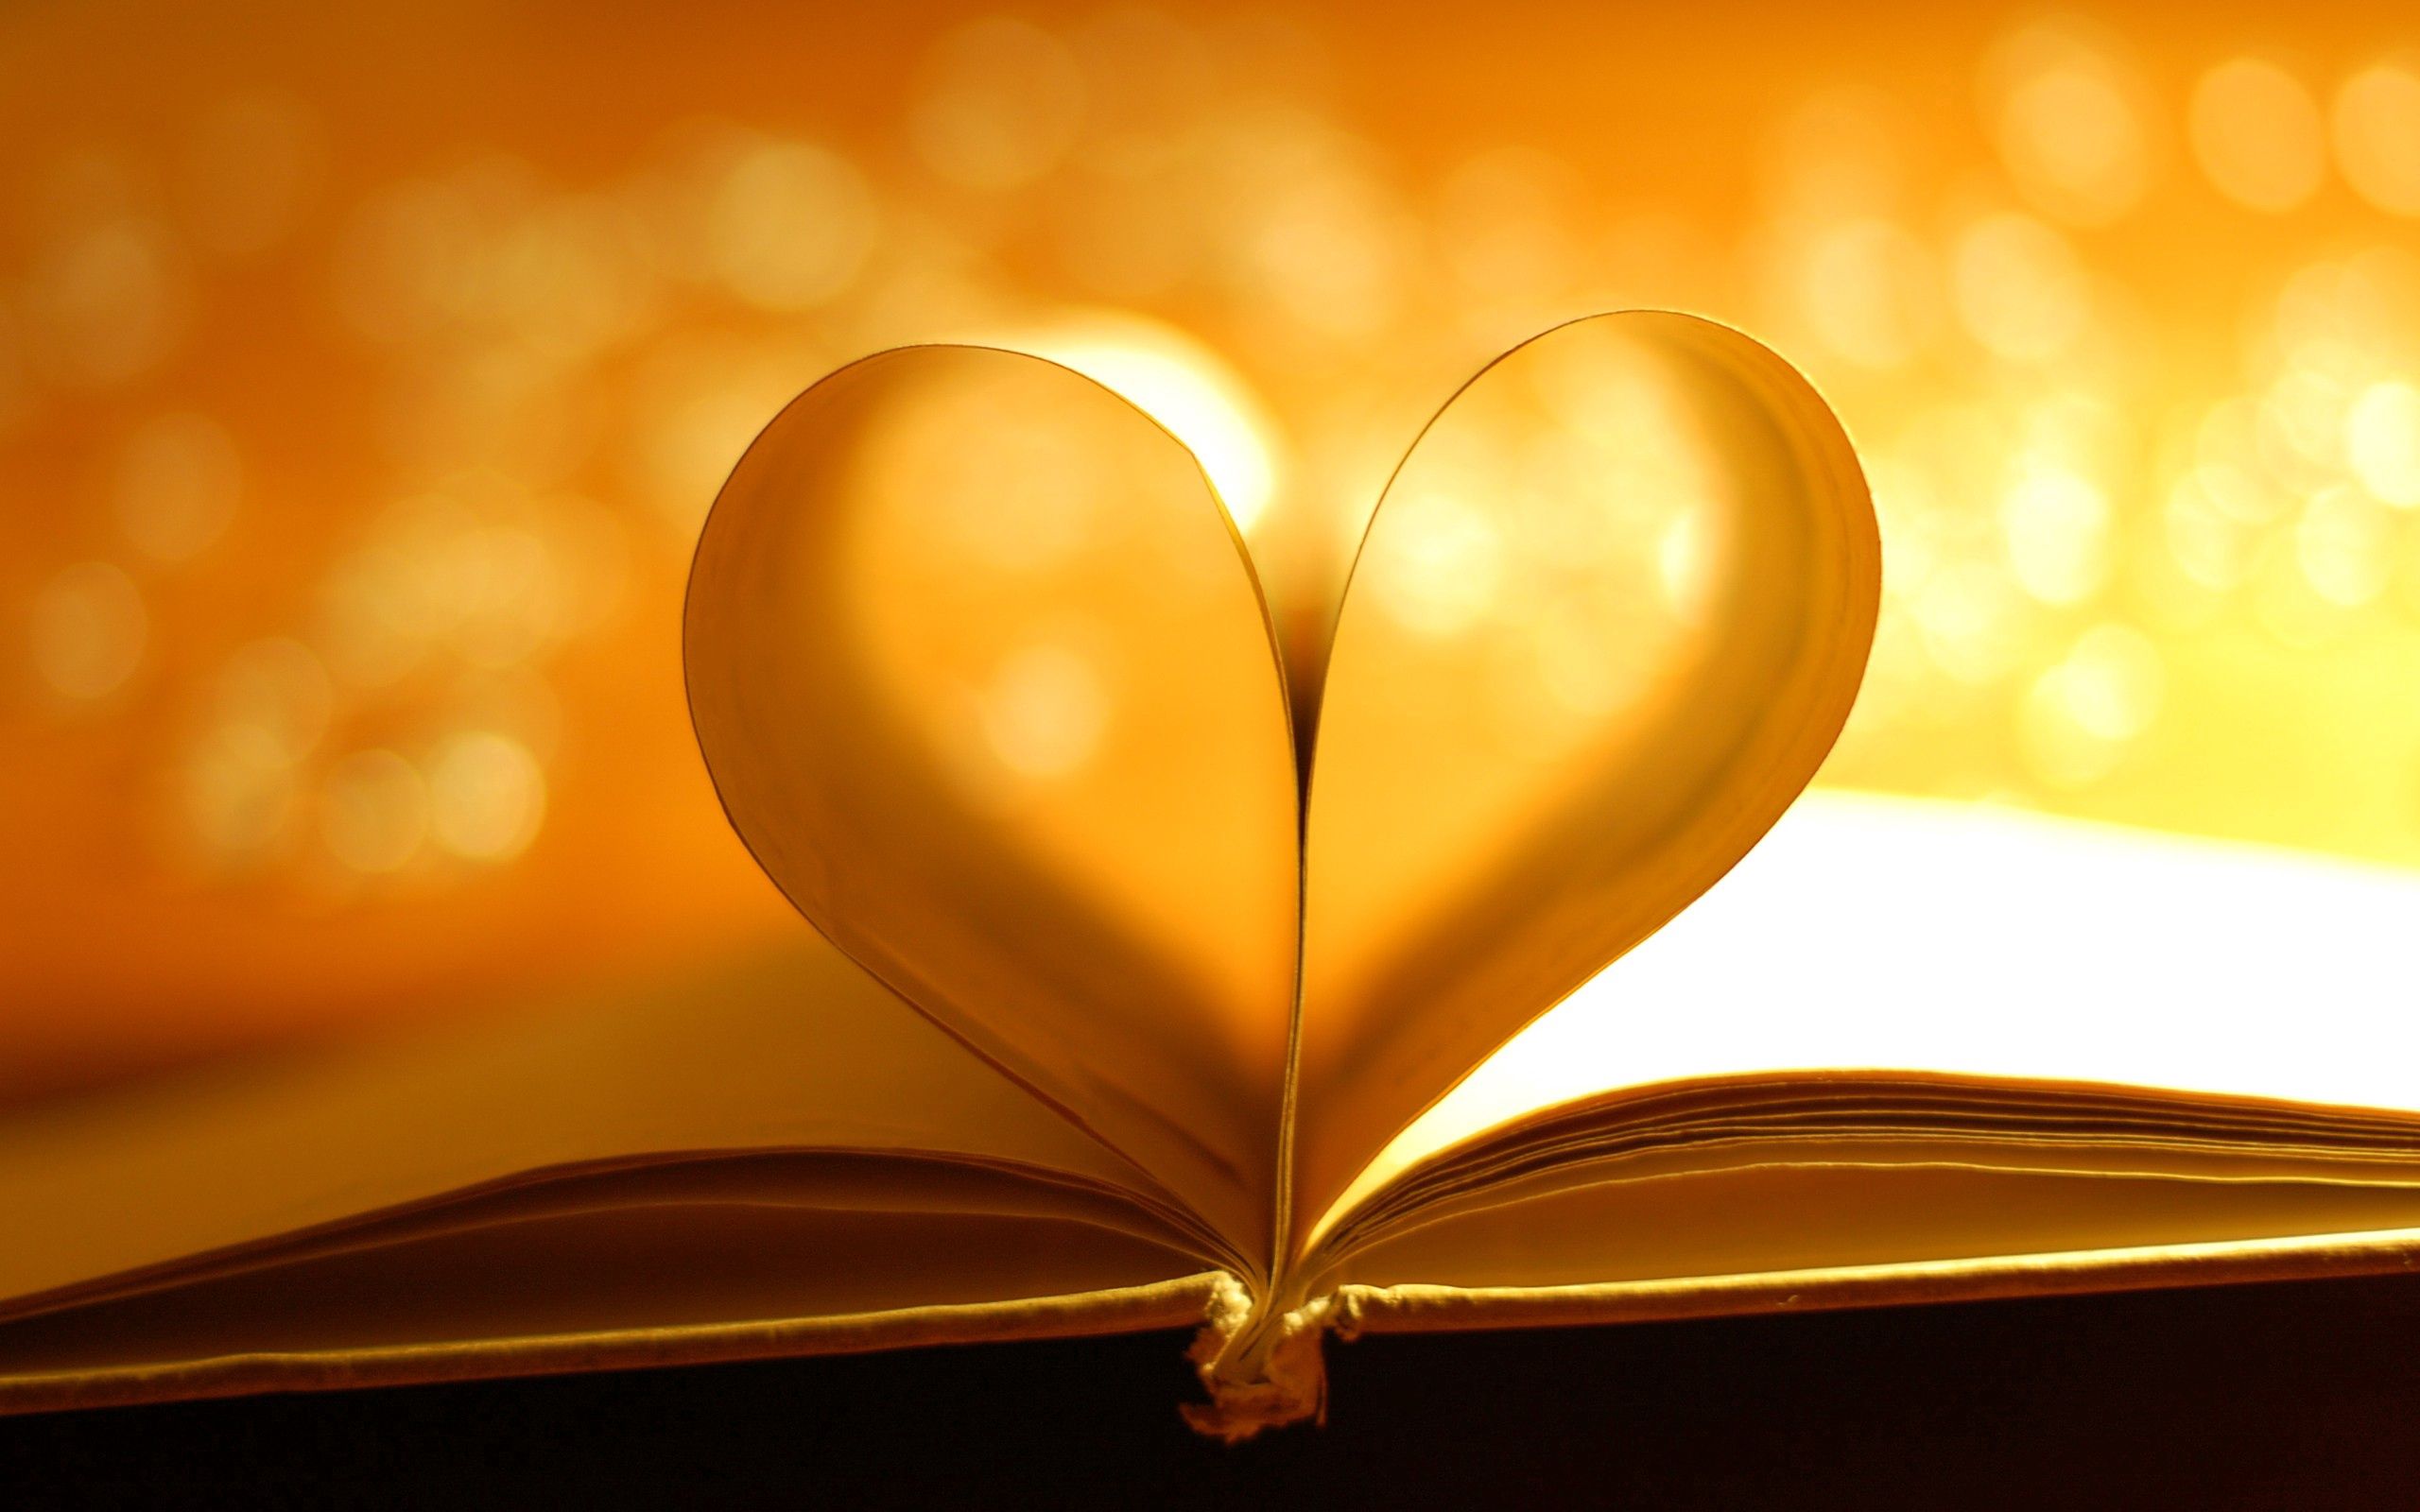 love, shine, light, shadow, heart, book, pages, page QHD